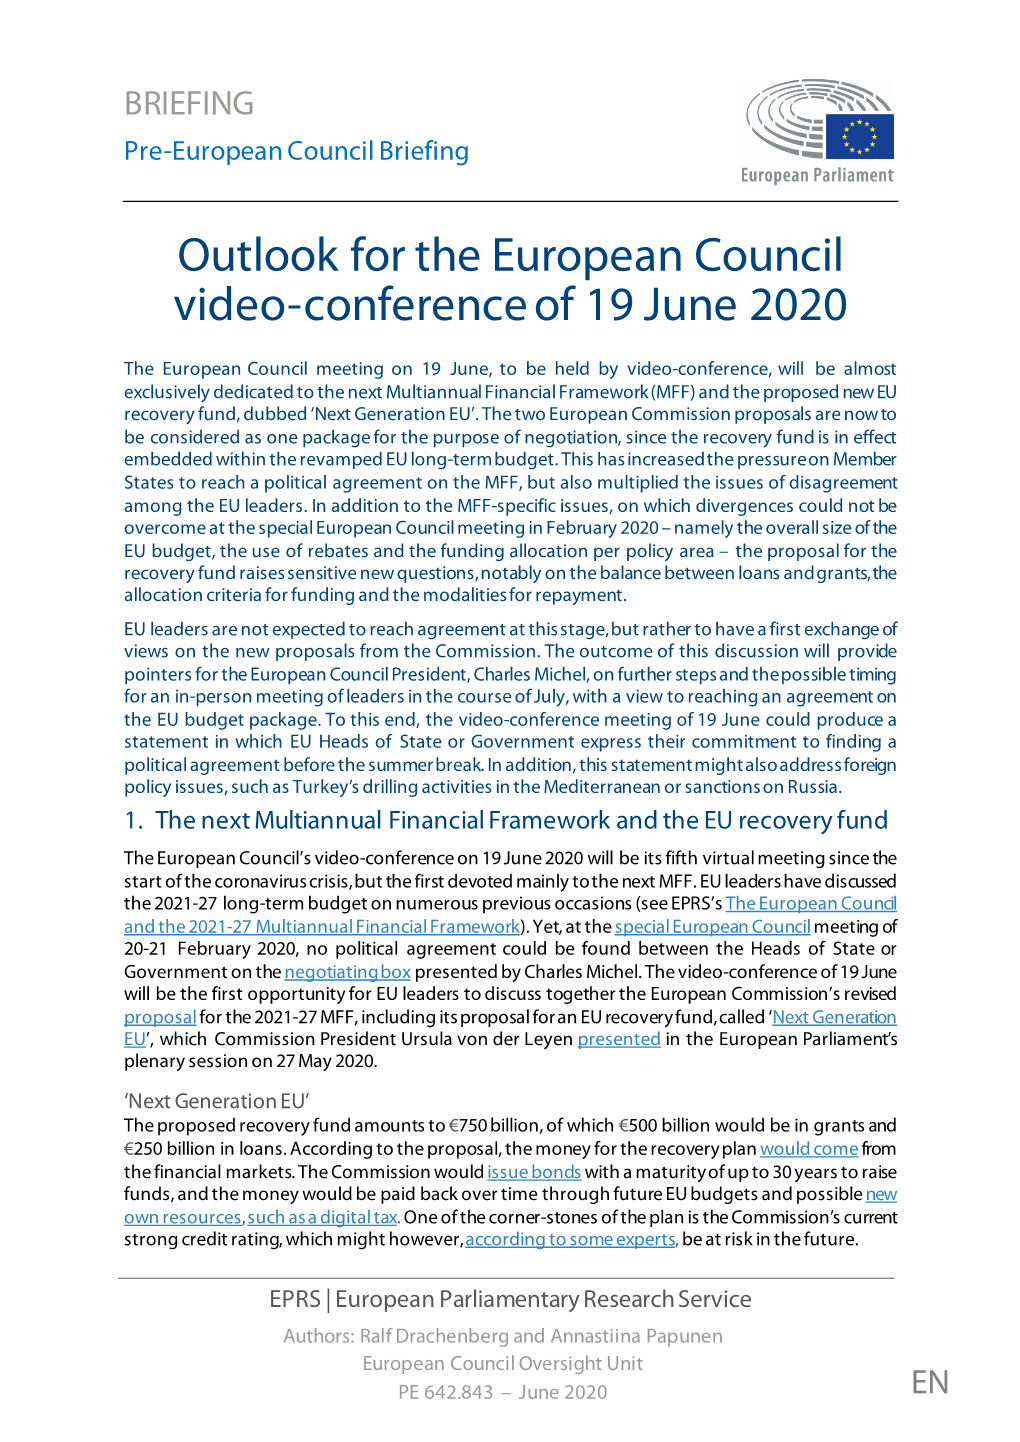 Outlook for the European Council Video-Conference of 19 June 2020